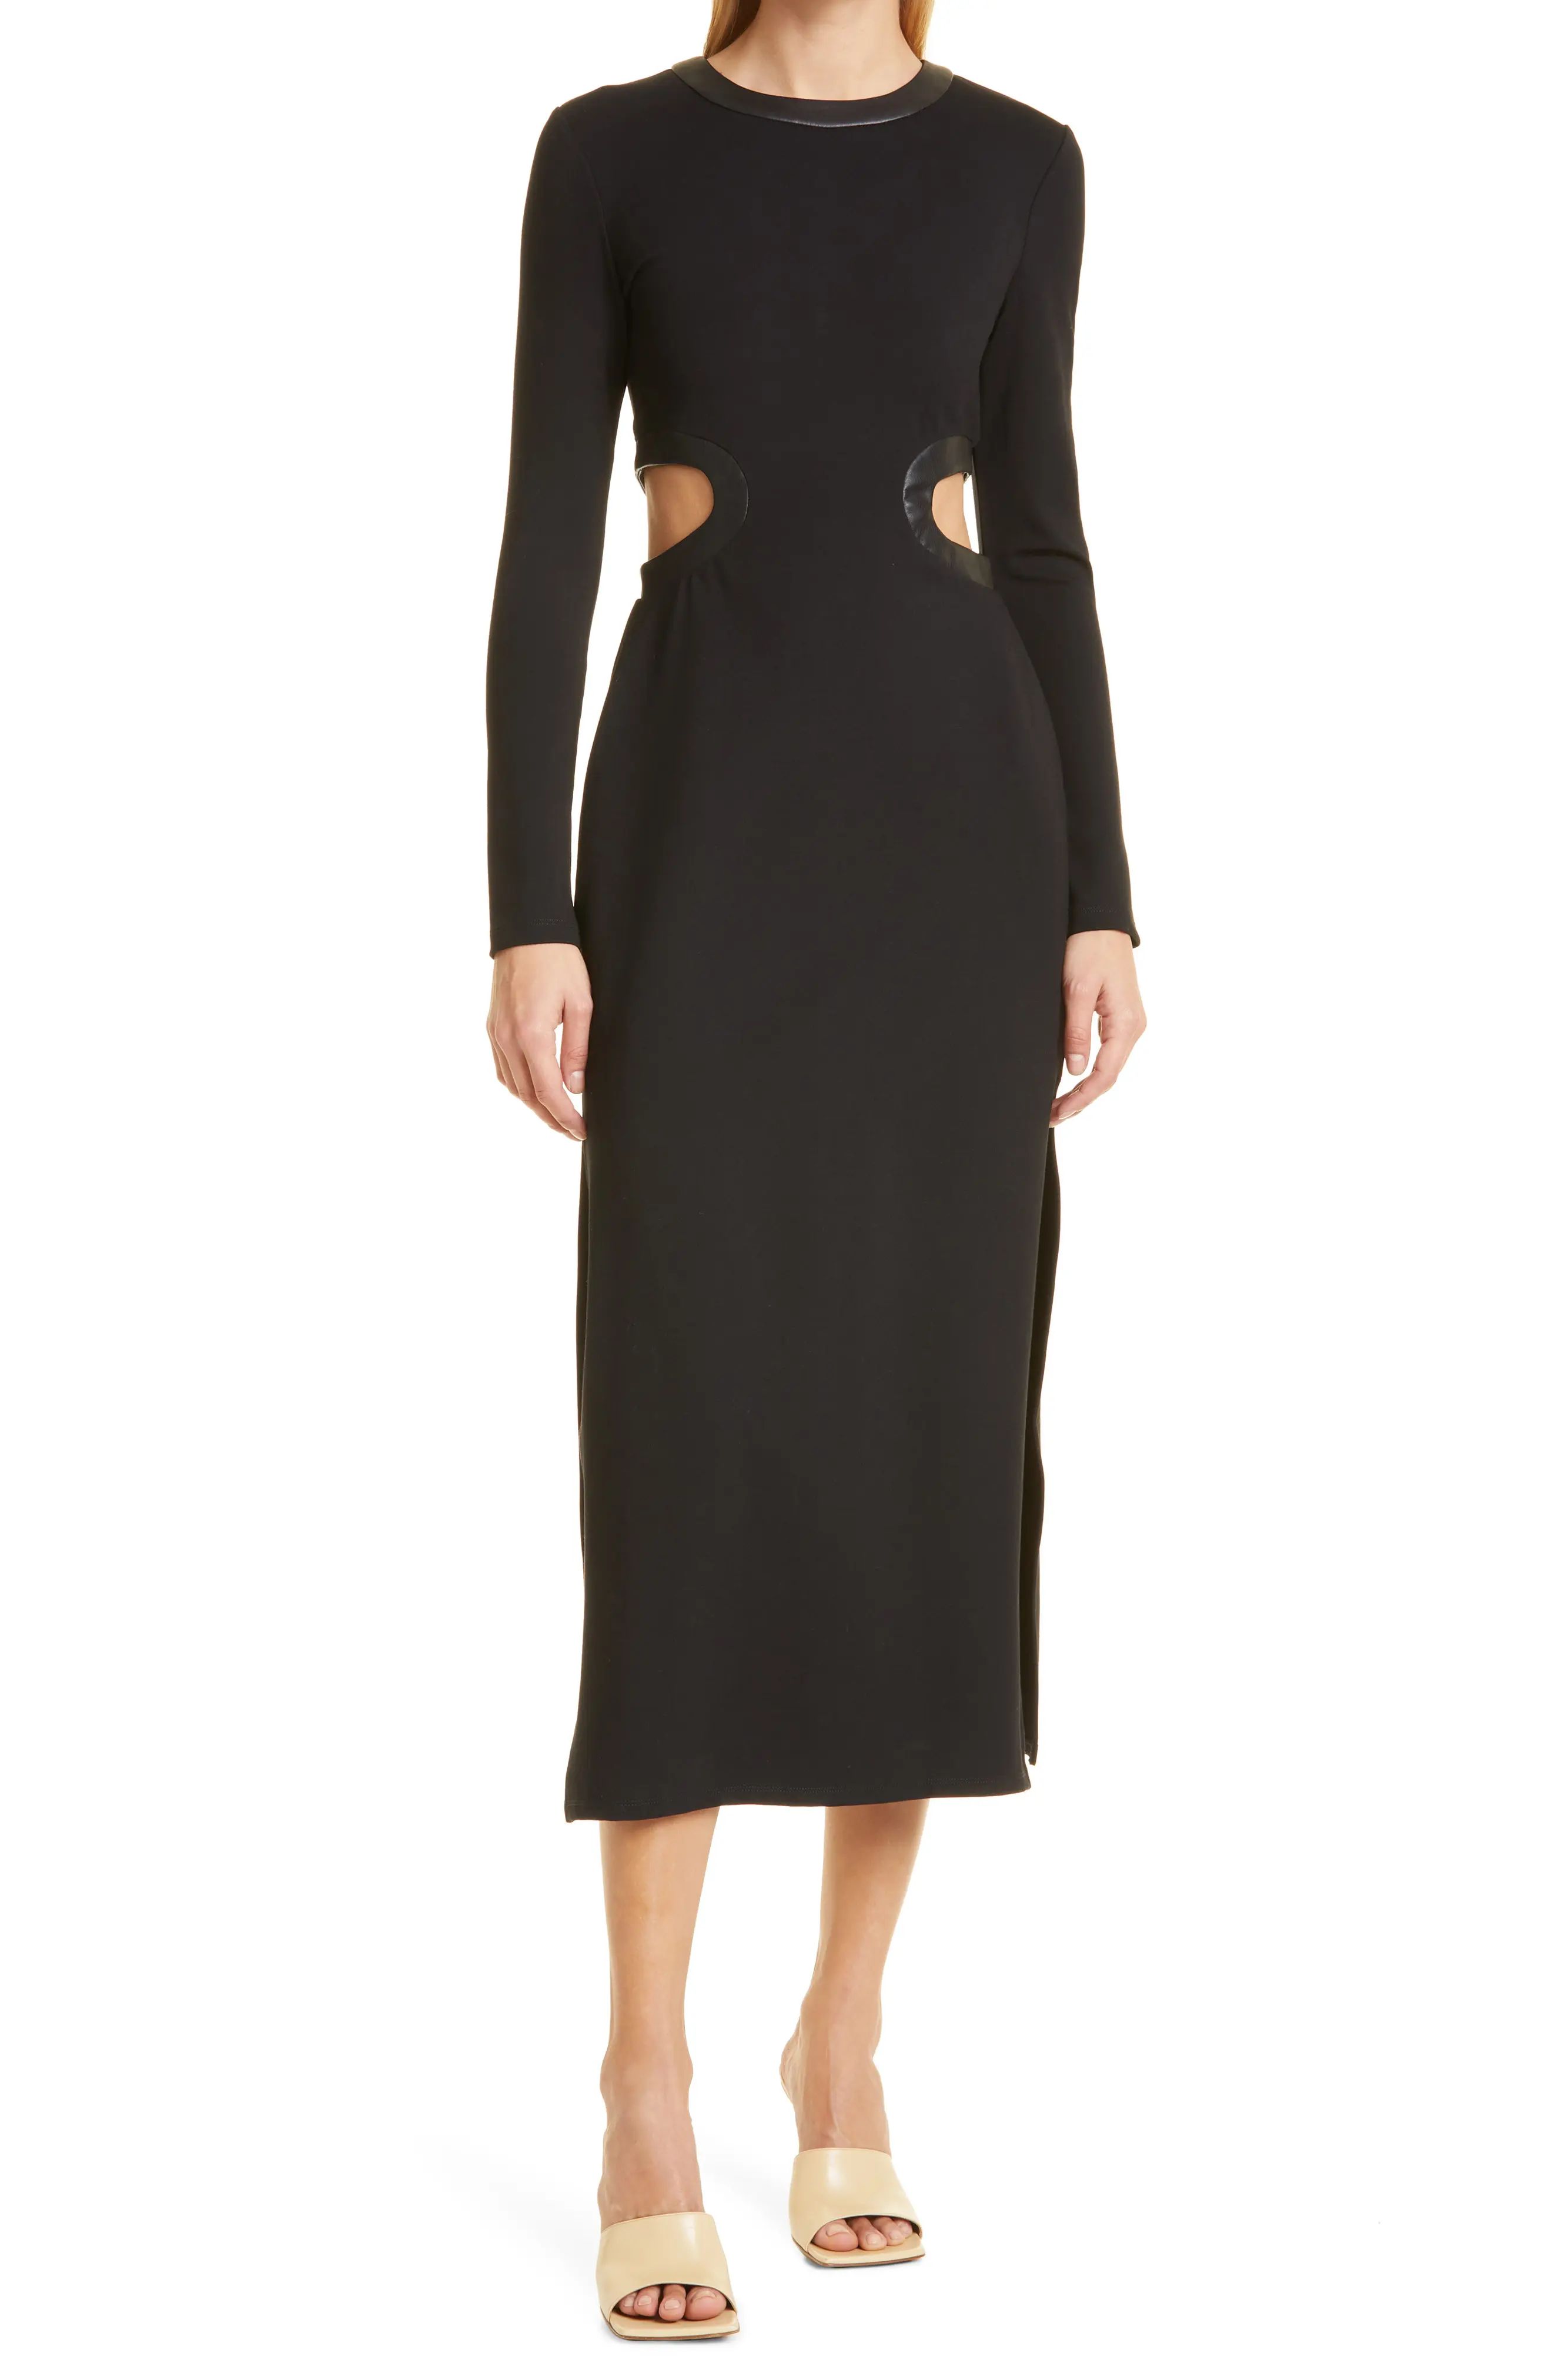 STAUD Dolce Cutout Waist Long Sleeve Dress in Black/Black at Nordstrom, Size X-Small | Nordstrom